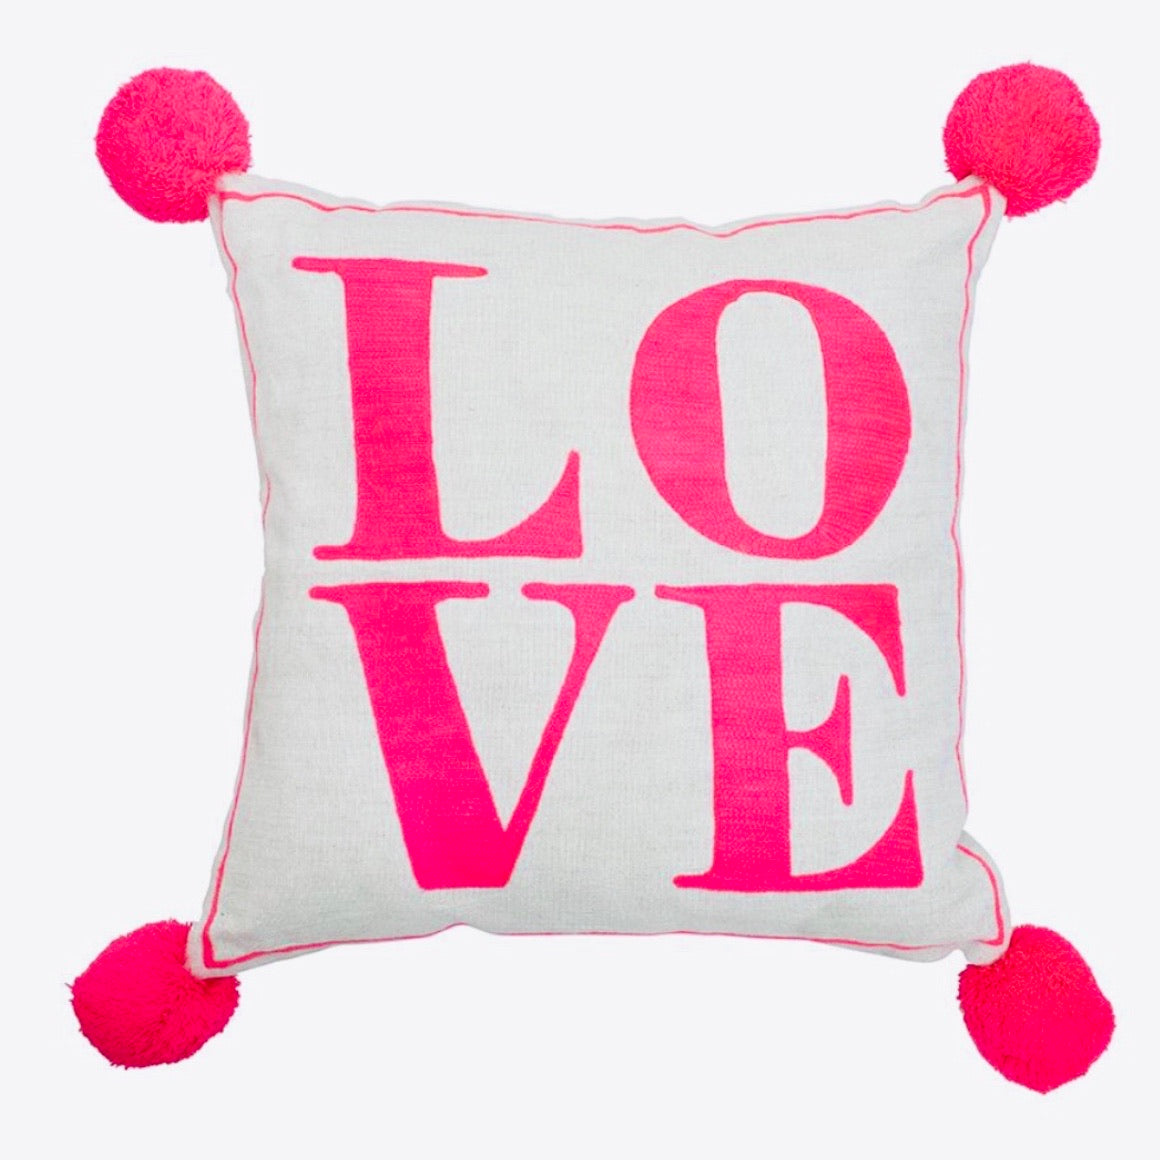 LOVE Cushion Neon Coral and Linen